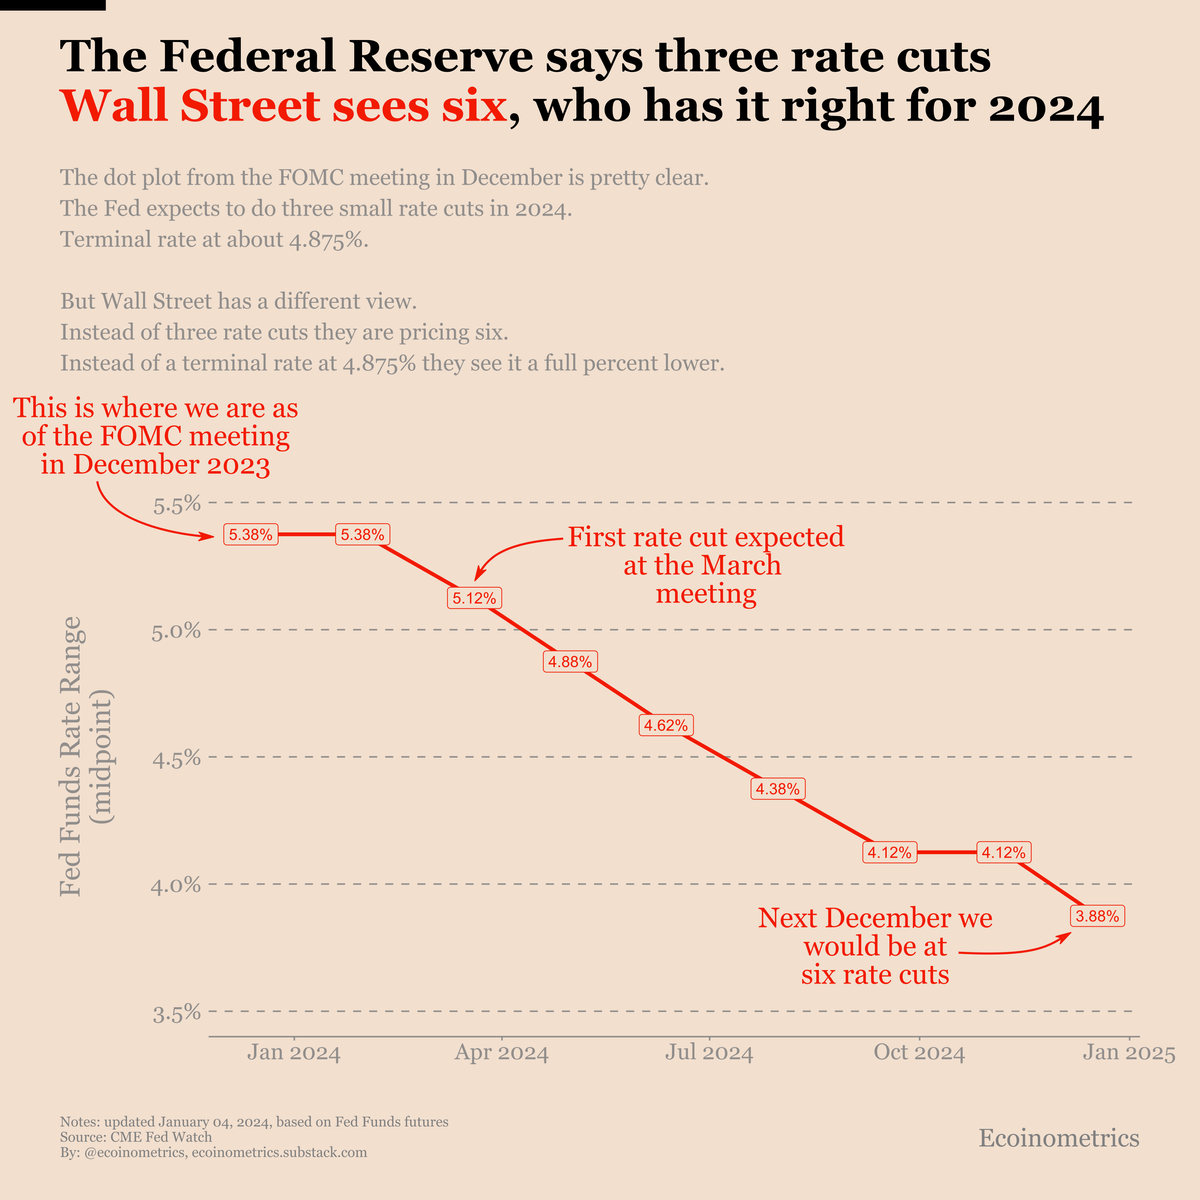 How many rate cuts in 2024: three according to the Federal Reserve, six according to Wall Street